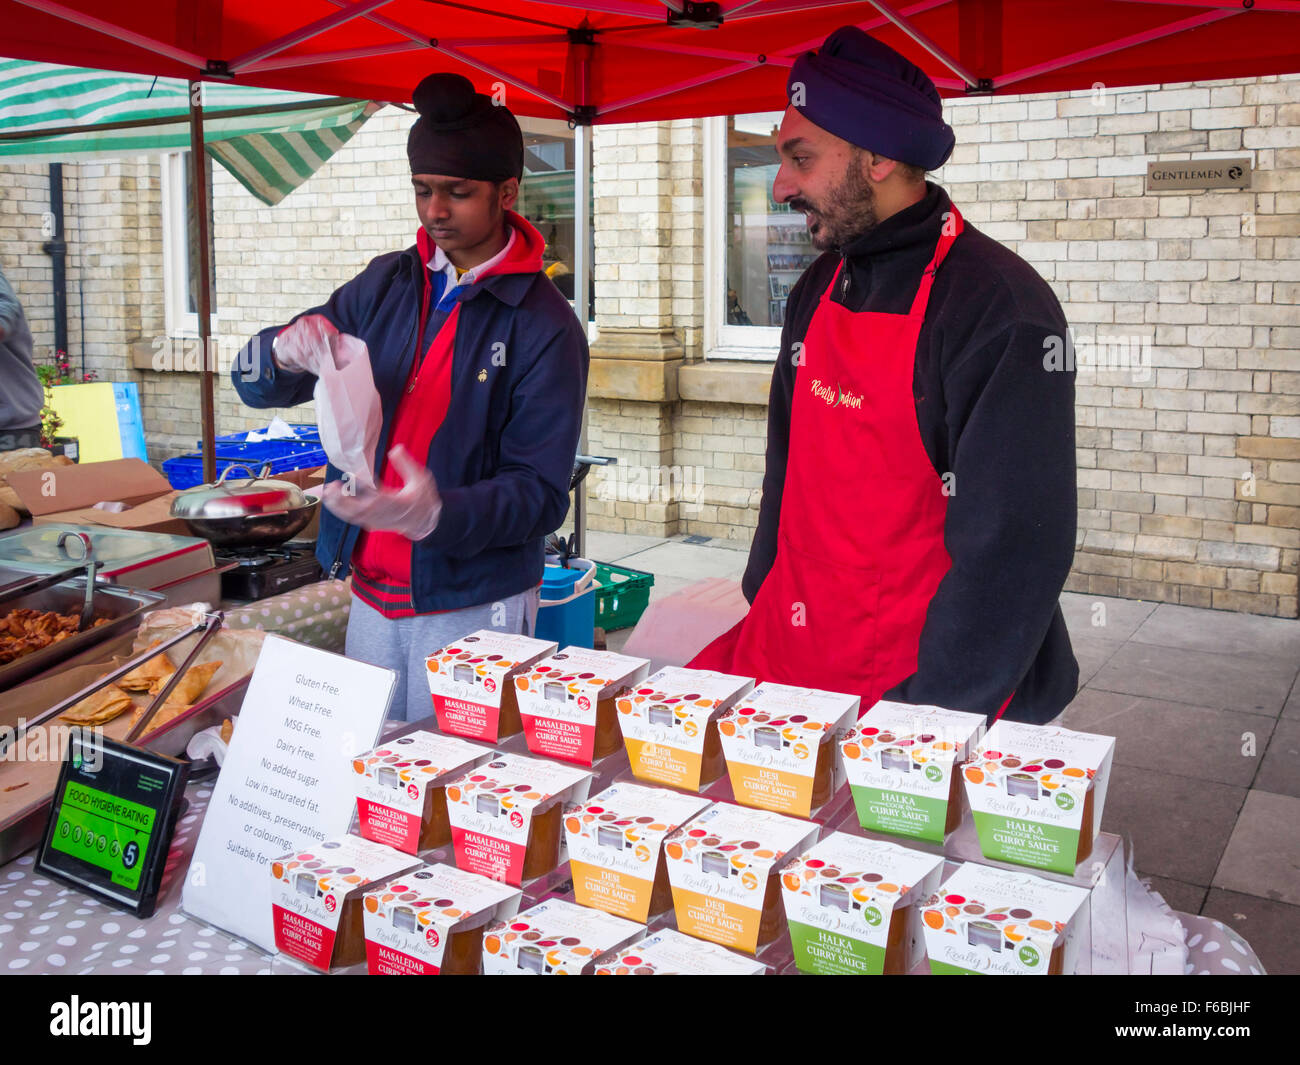 Two Sikh men stall holders at a UK farmer's market serving Curry Sauces and cooked 'Really Indian' brand food Stock Photo